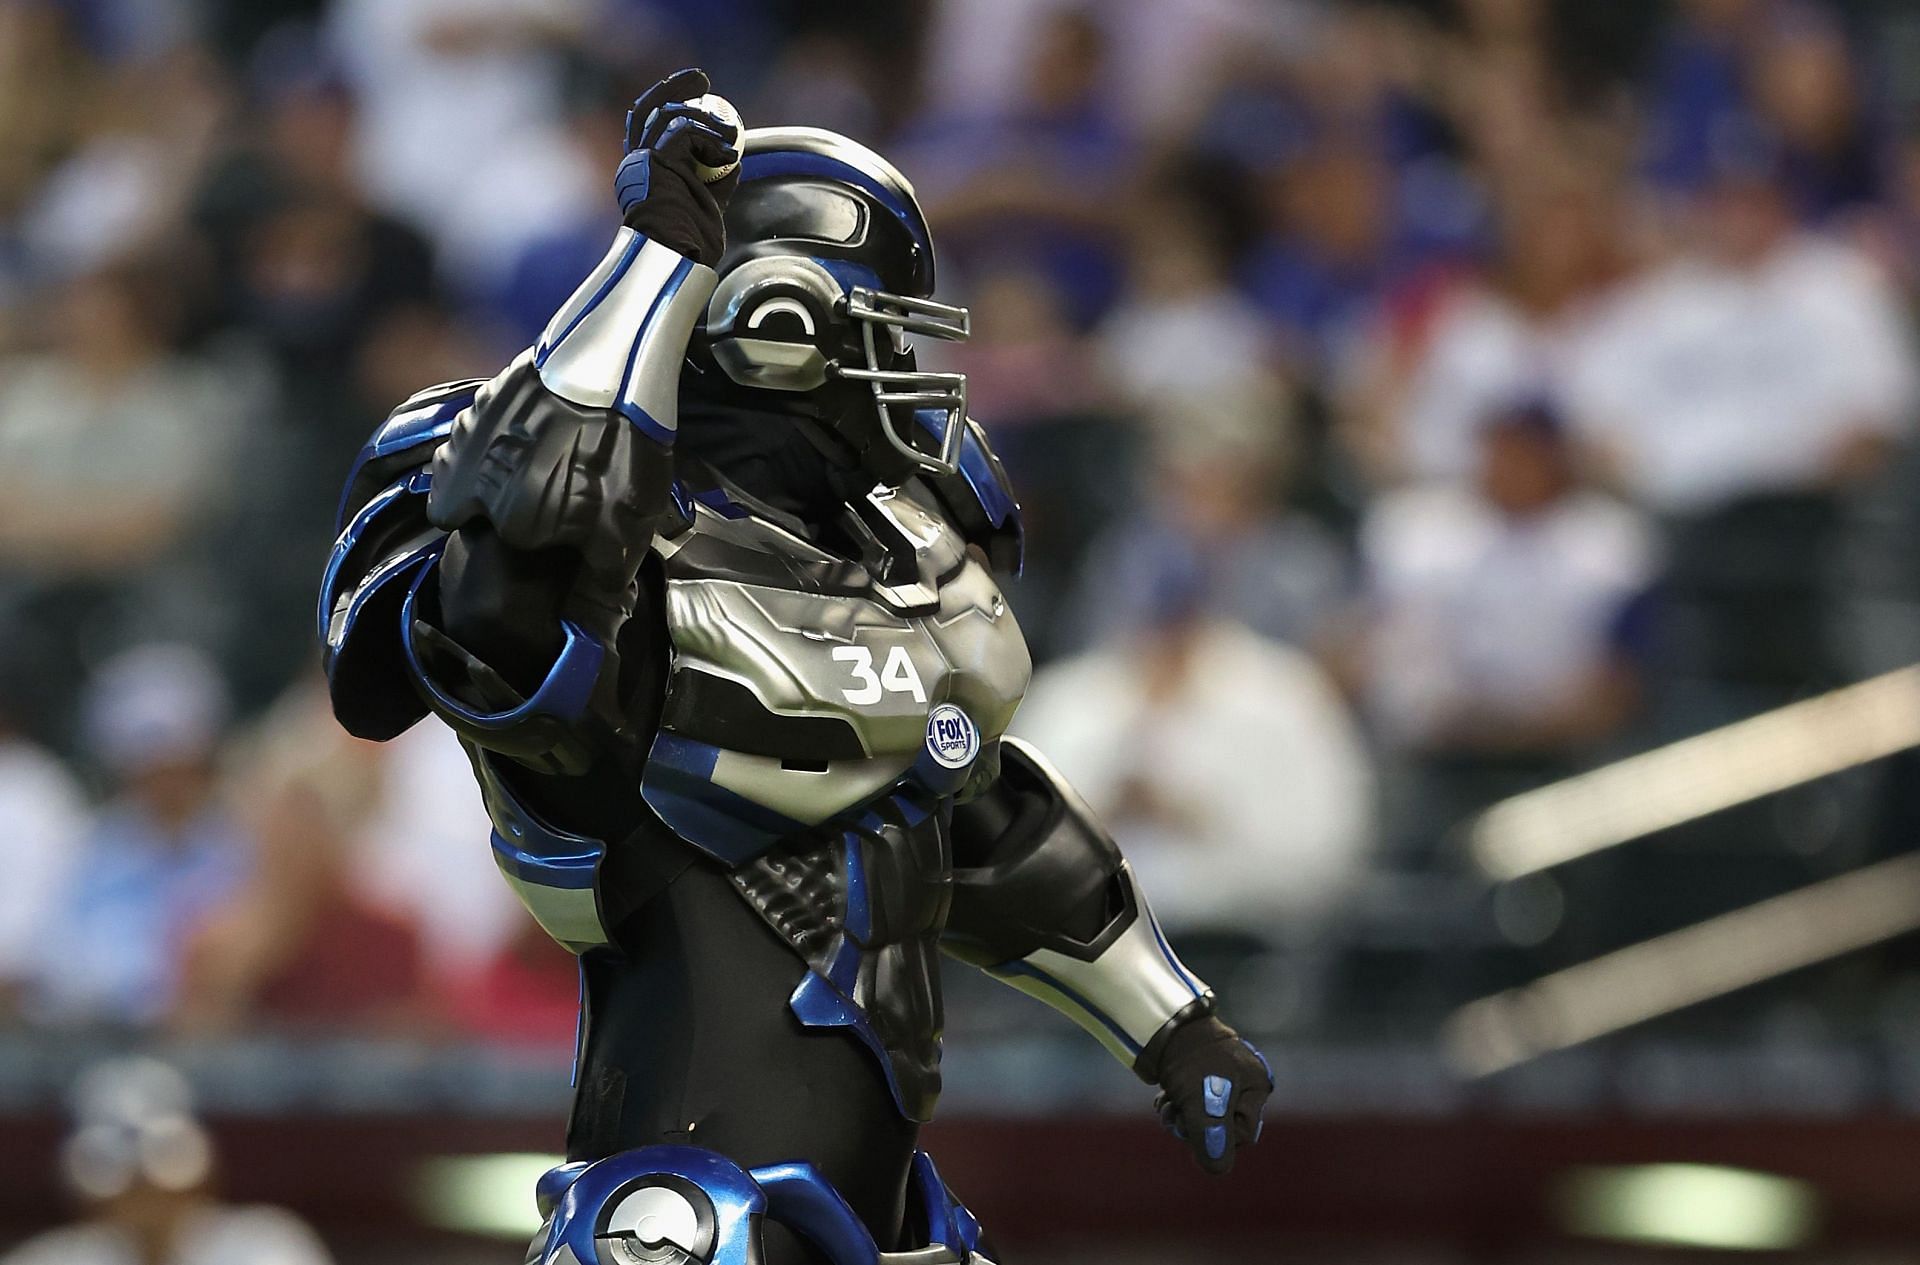 When Cleatus, the NFL robot come out? Exploring origins of in-season gimmick